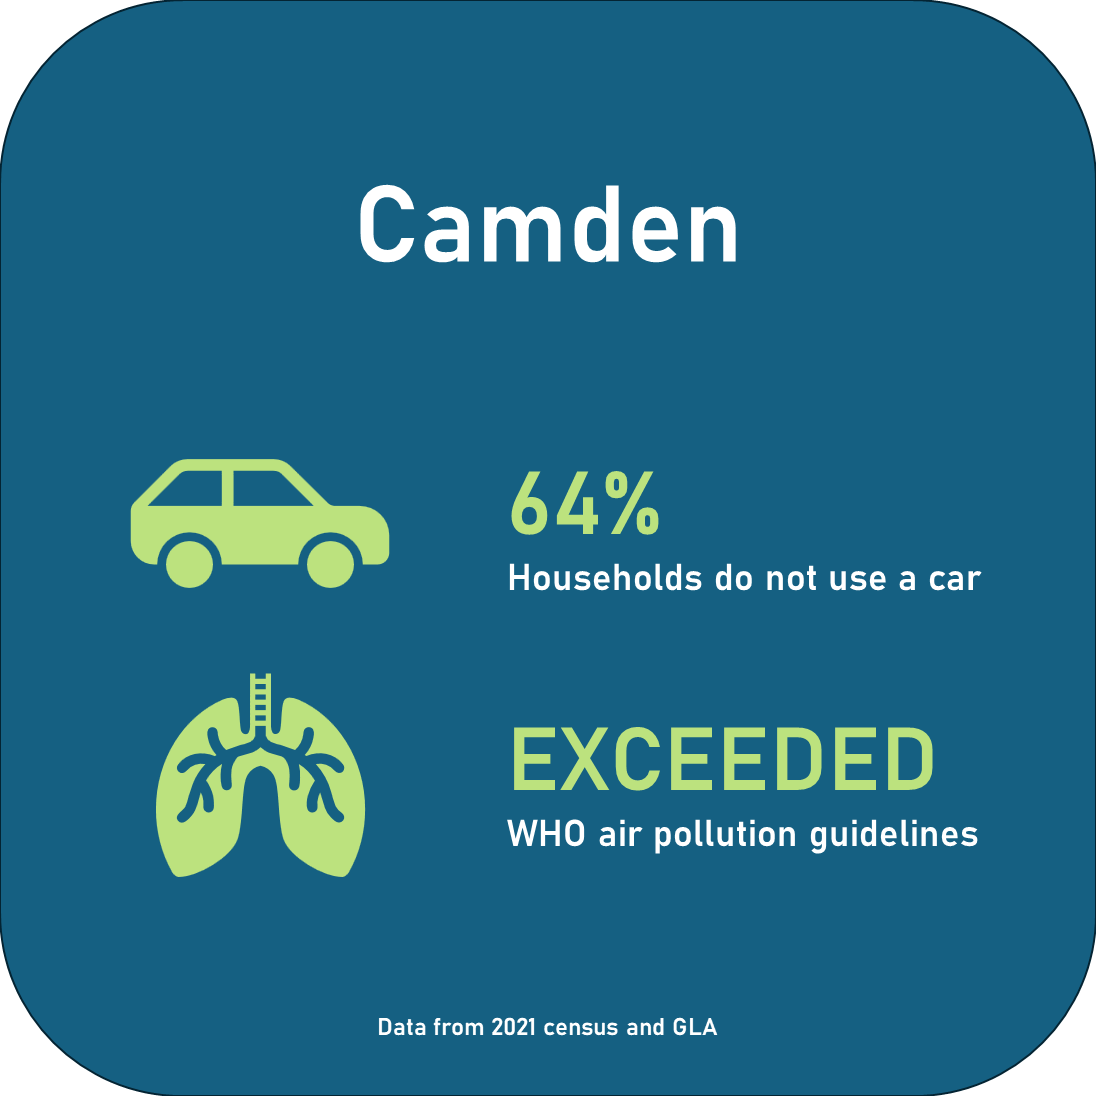 64% households do not use a car. Exceeded WHO air pollution guidelines.